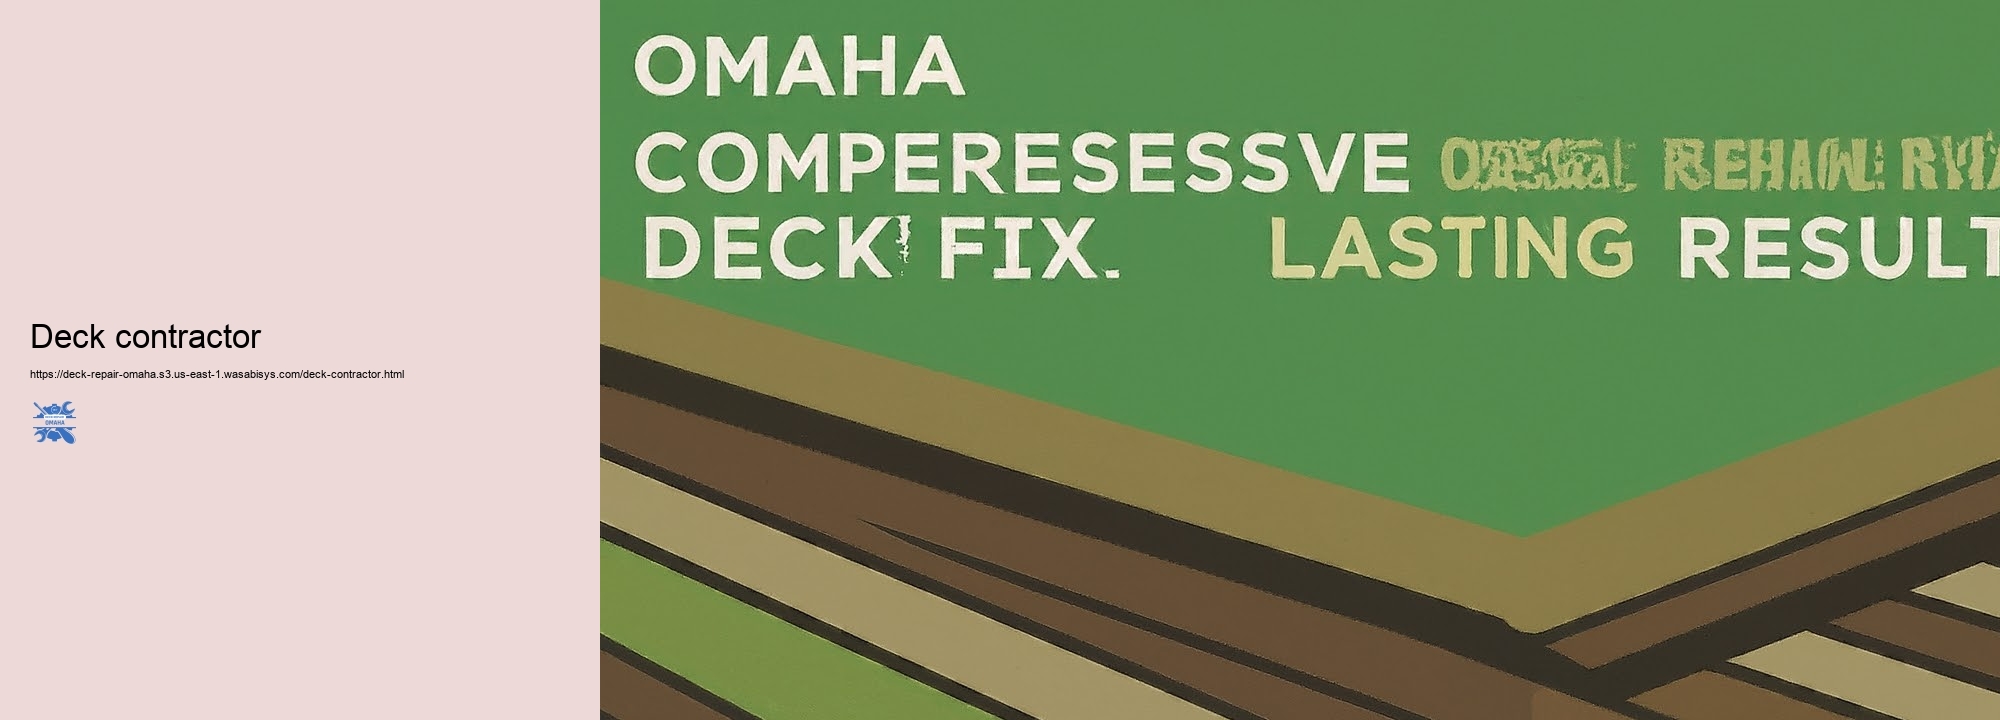 Economical Deck Fixing Solutions for Omaha Home owners